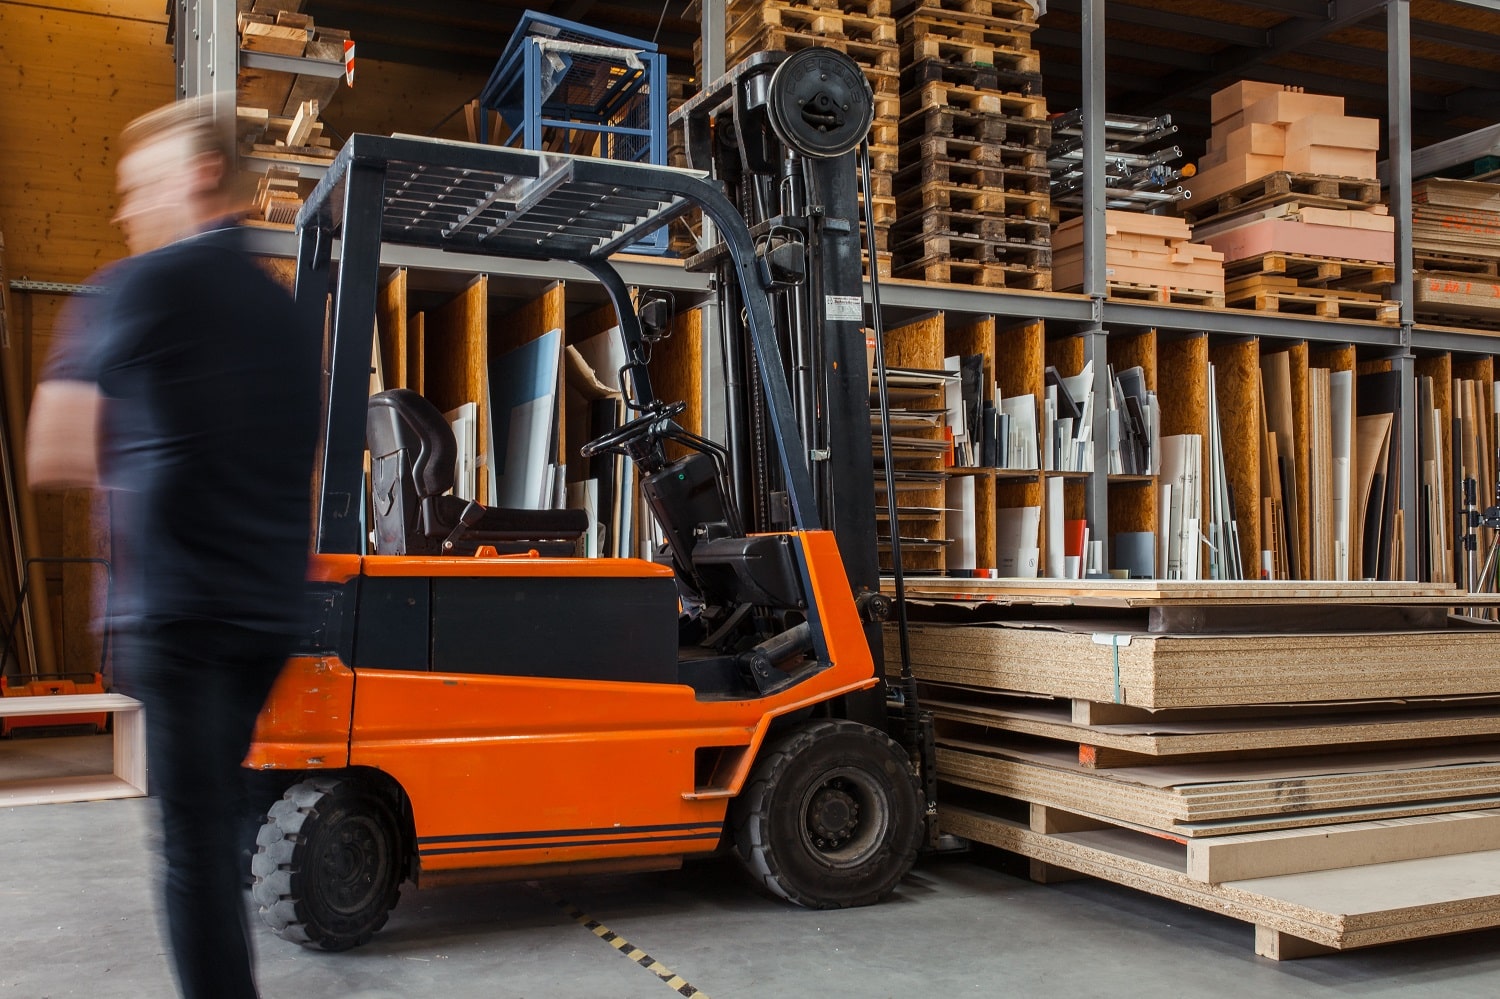 How To Know When It's Time To Replace Your Forklift Forks?